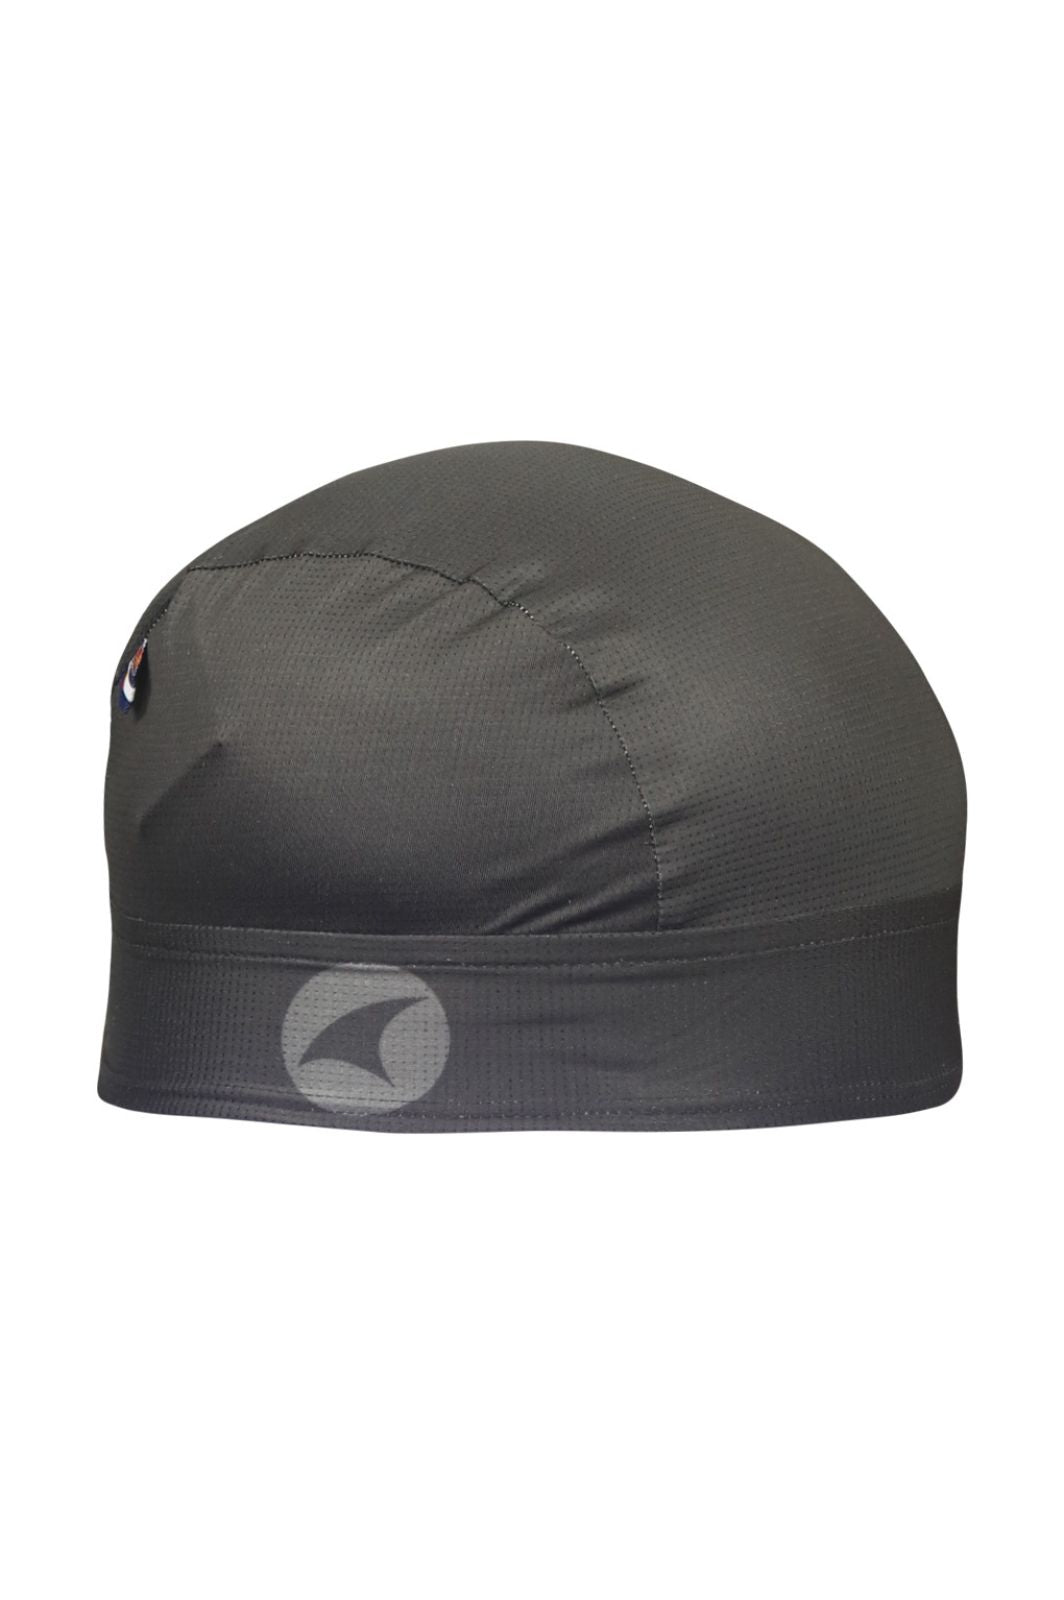 Charcoal Cycling Summer Skull Cap - Right View